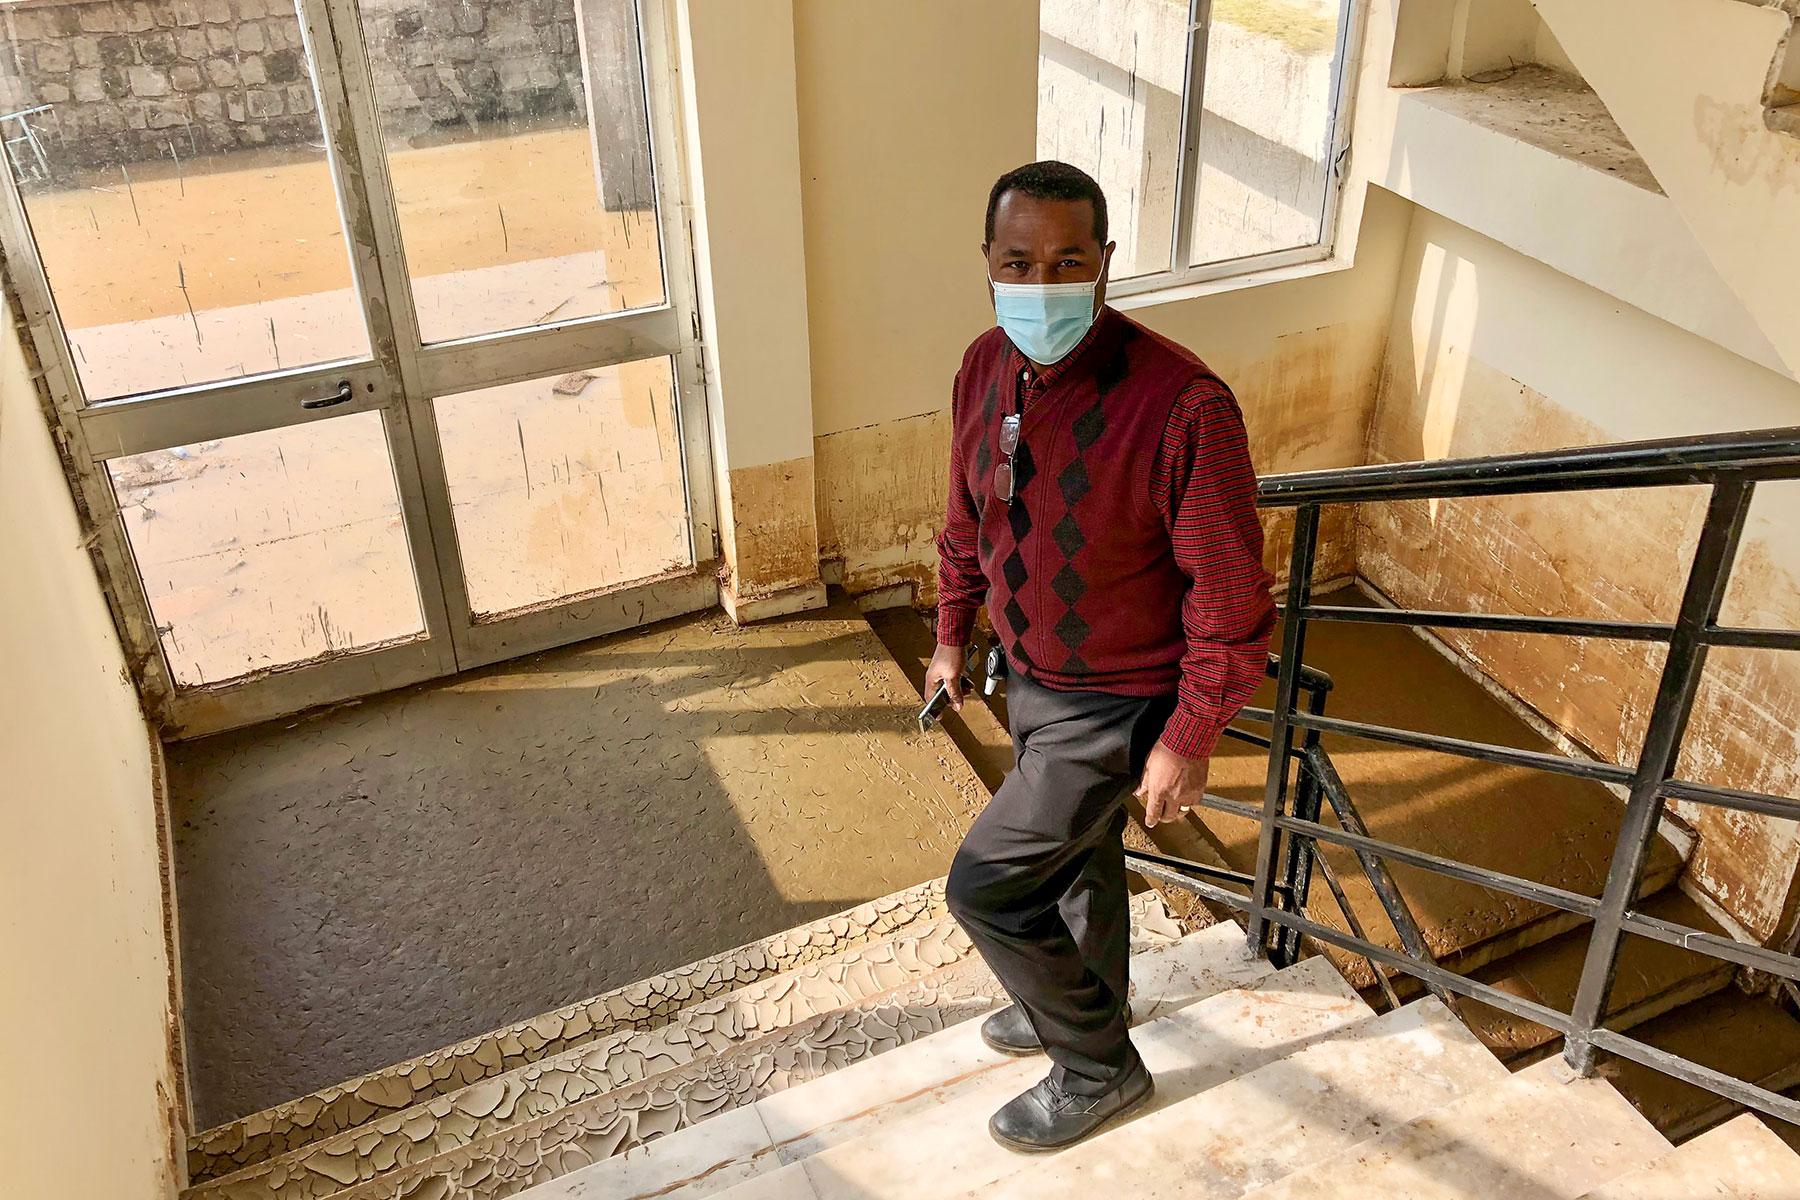 Rev. Dr Bruk Ayele Asale, president of the Mekane Yesus Seminary, on the ground level stairway to a dormitory floor. The walls bear the stained marks of the height that flooding waters had reached. All Photos: LWF/M. DÃ¶lker